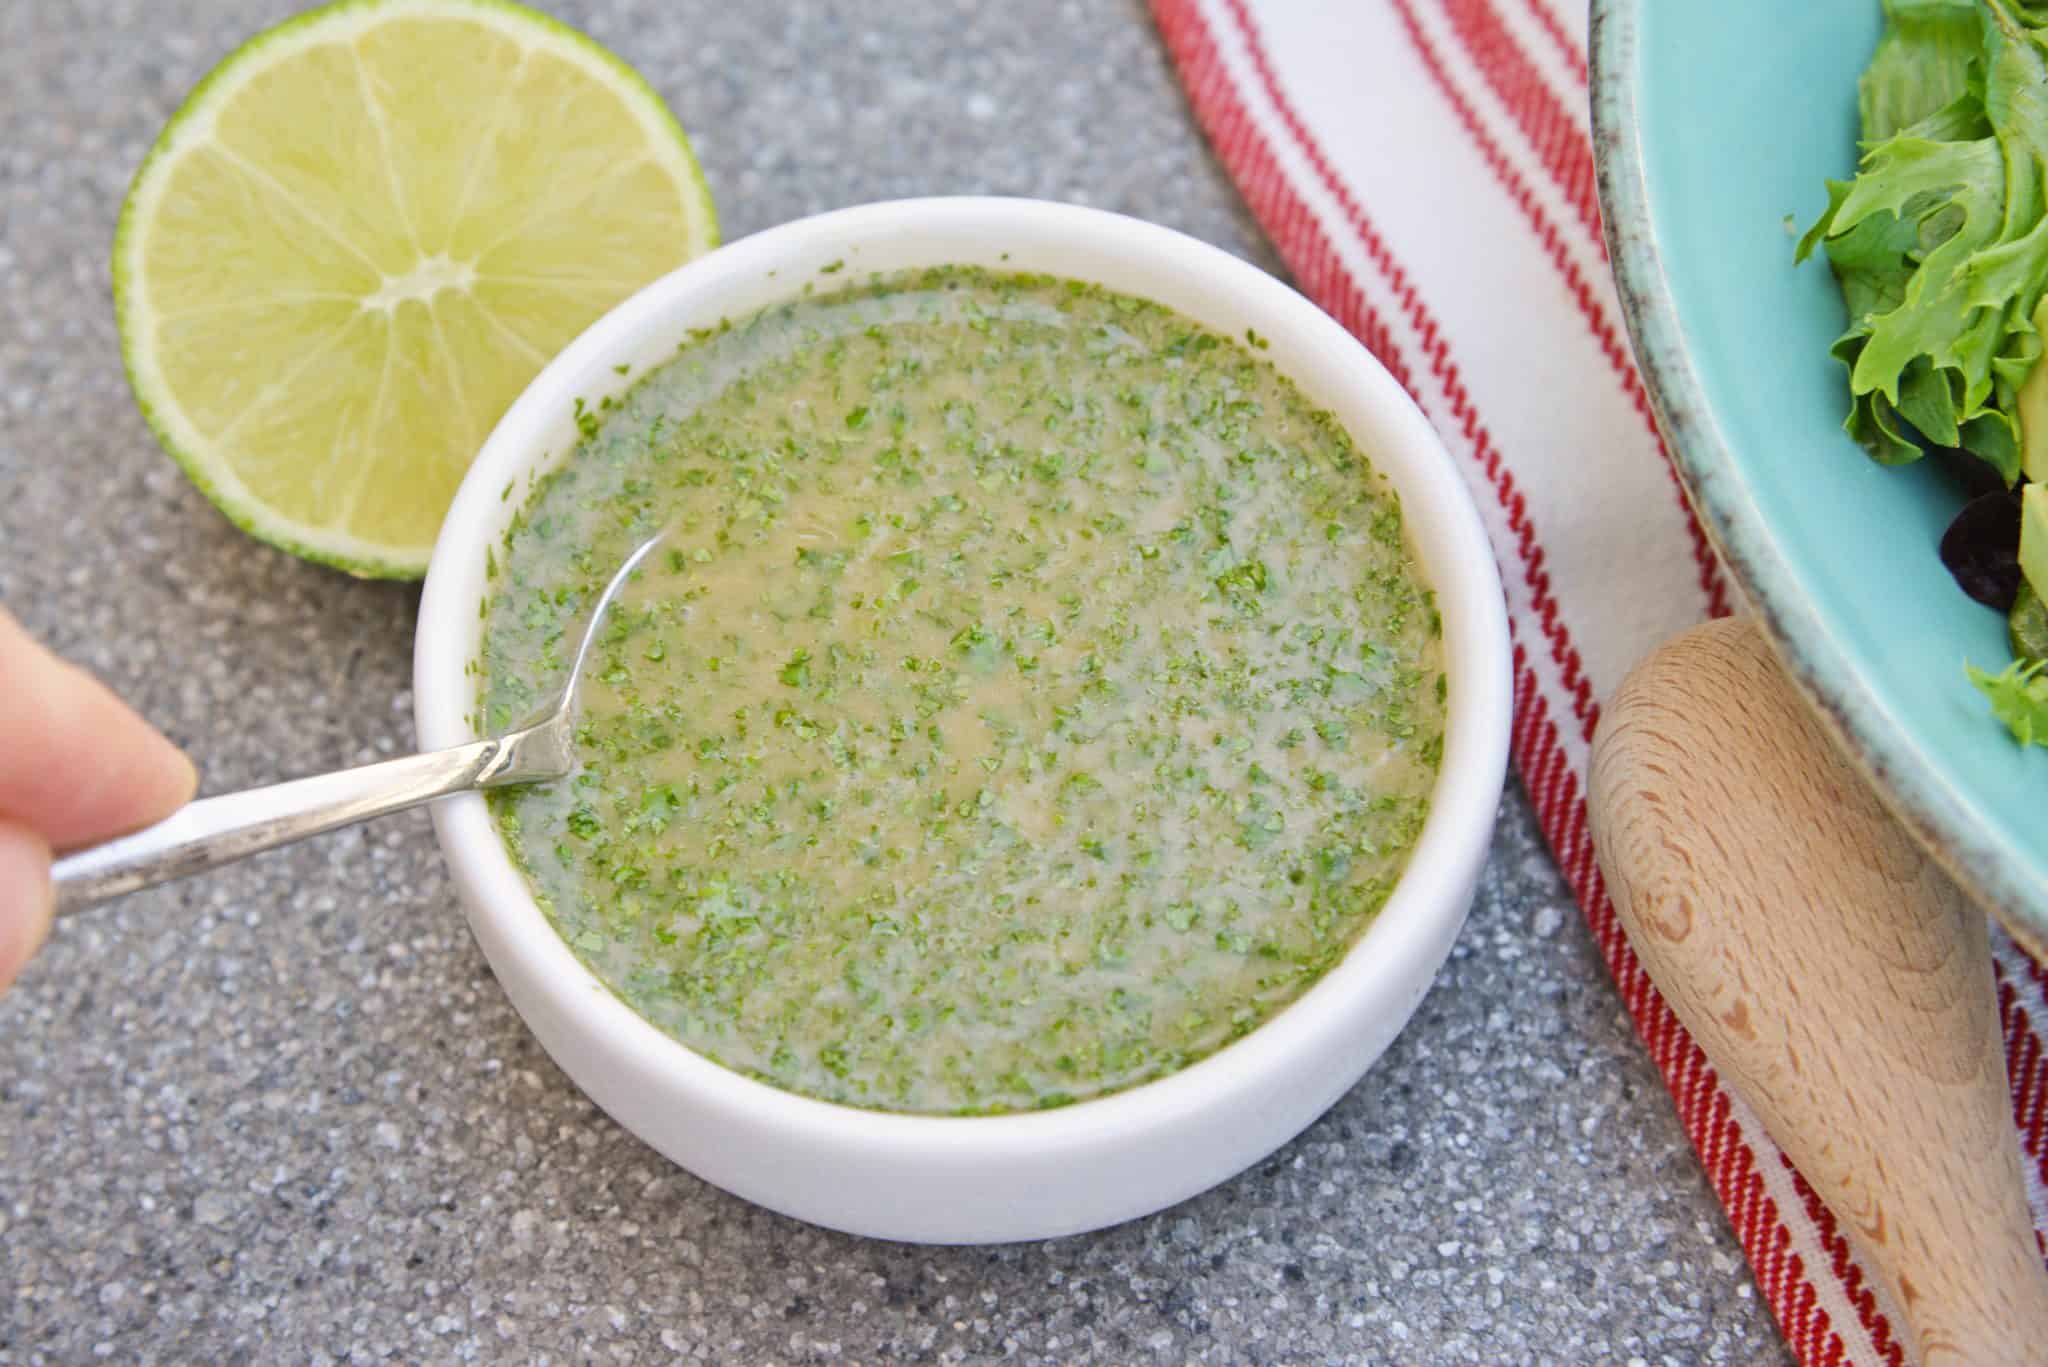 Cilantro Lime Dressing is an easy and delicious citrus dressing for salads, dipping sauces or even as a marinade! Spicy and sweet, it is no-cook and comes together in 5 minutes. #homemadesaladdressing www.savoryexperiments.com